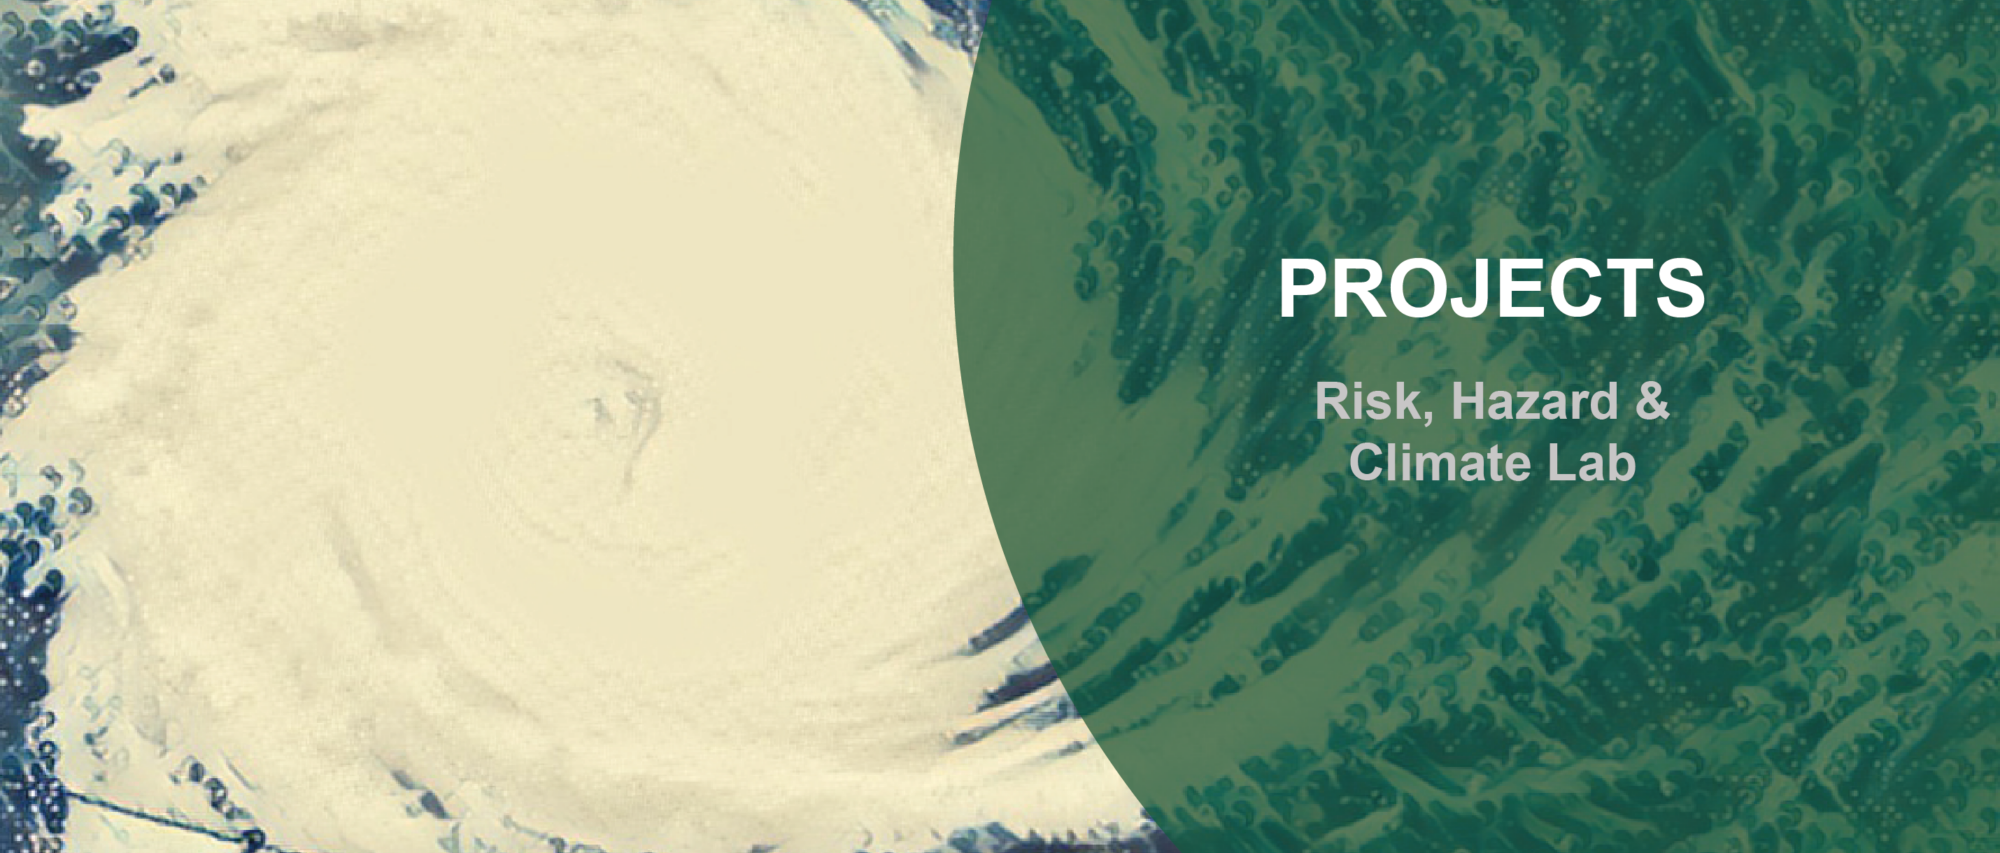 Projects - Risk, Hazard & Climate Lab